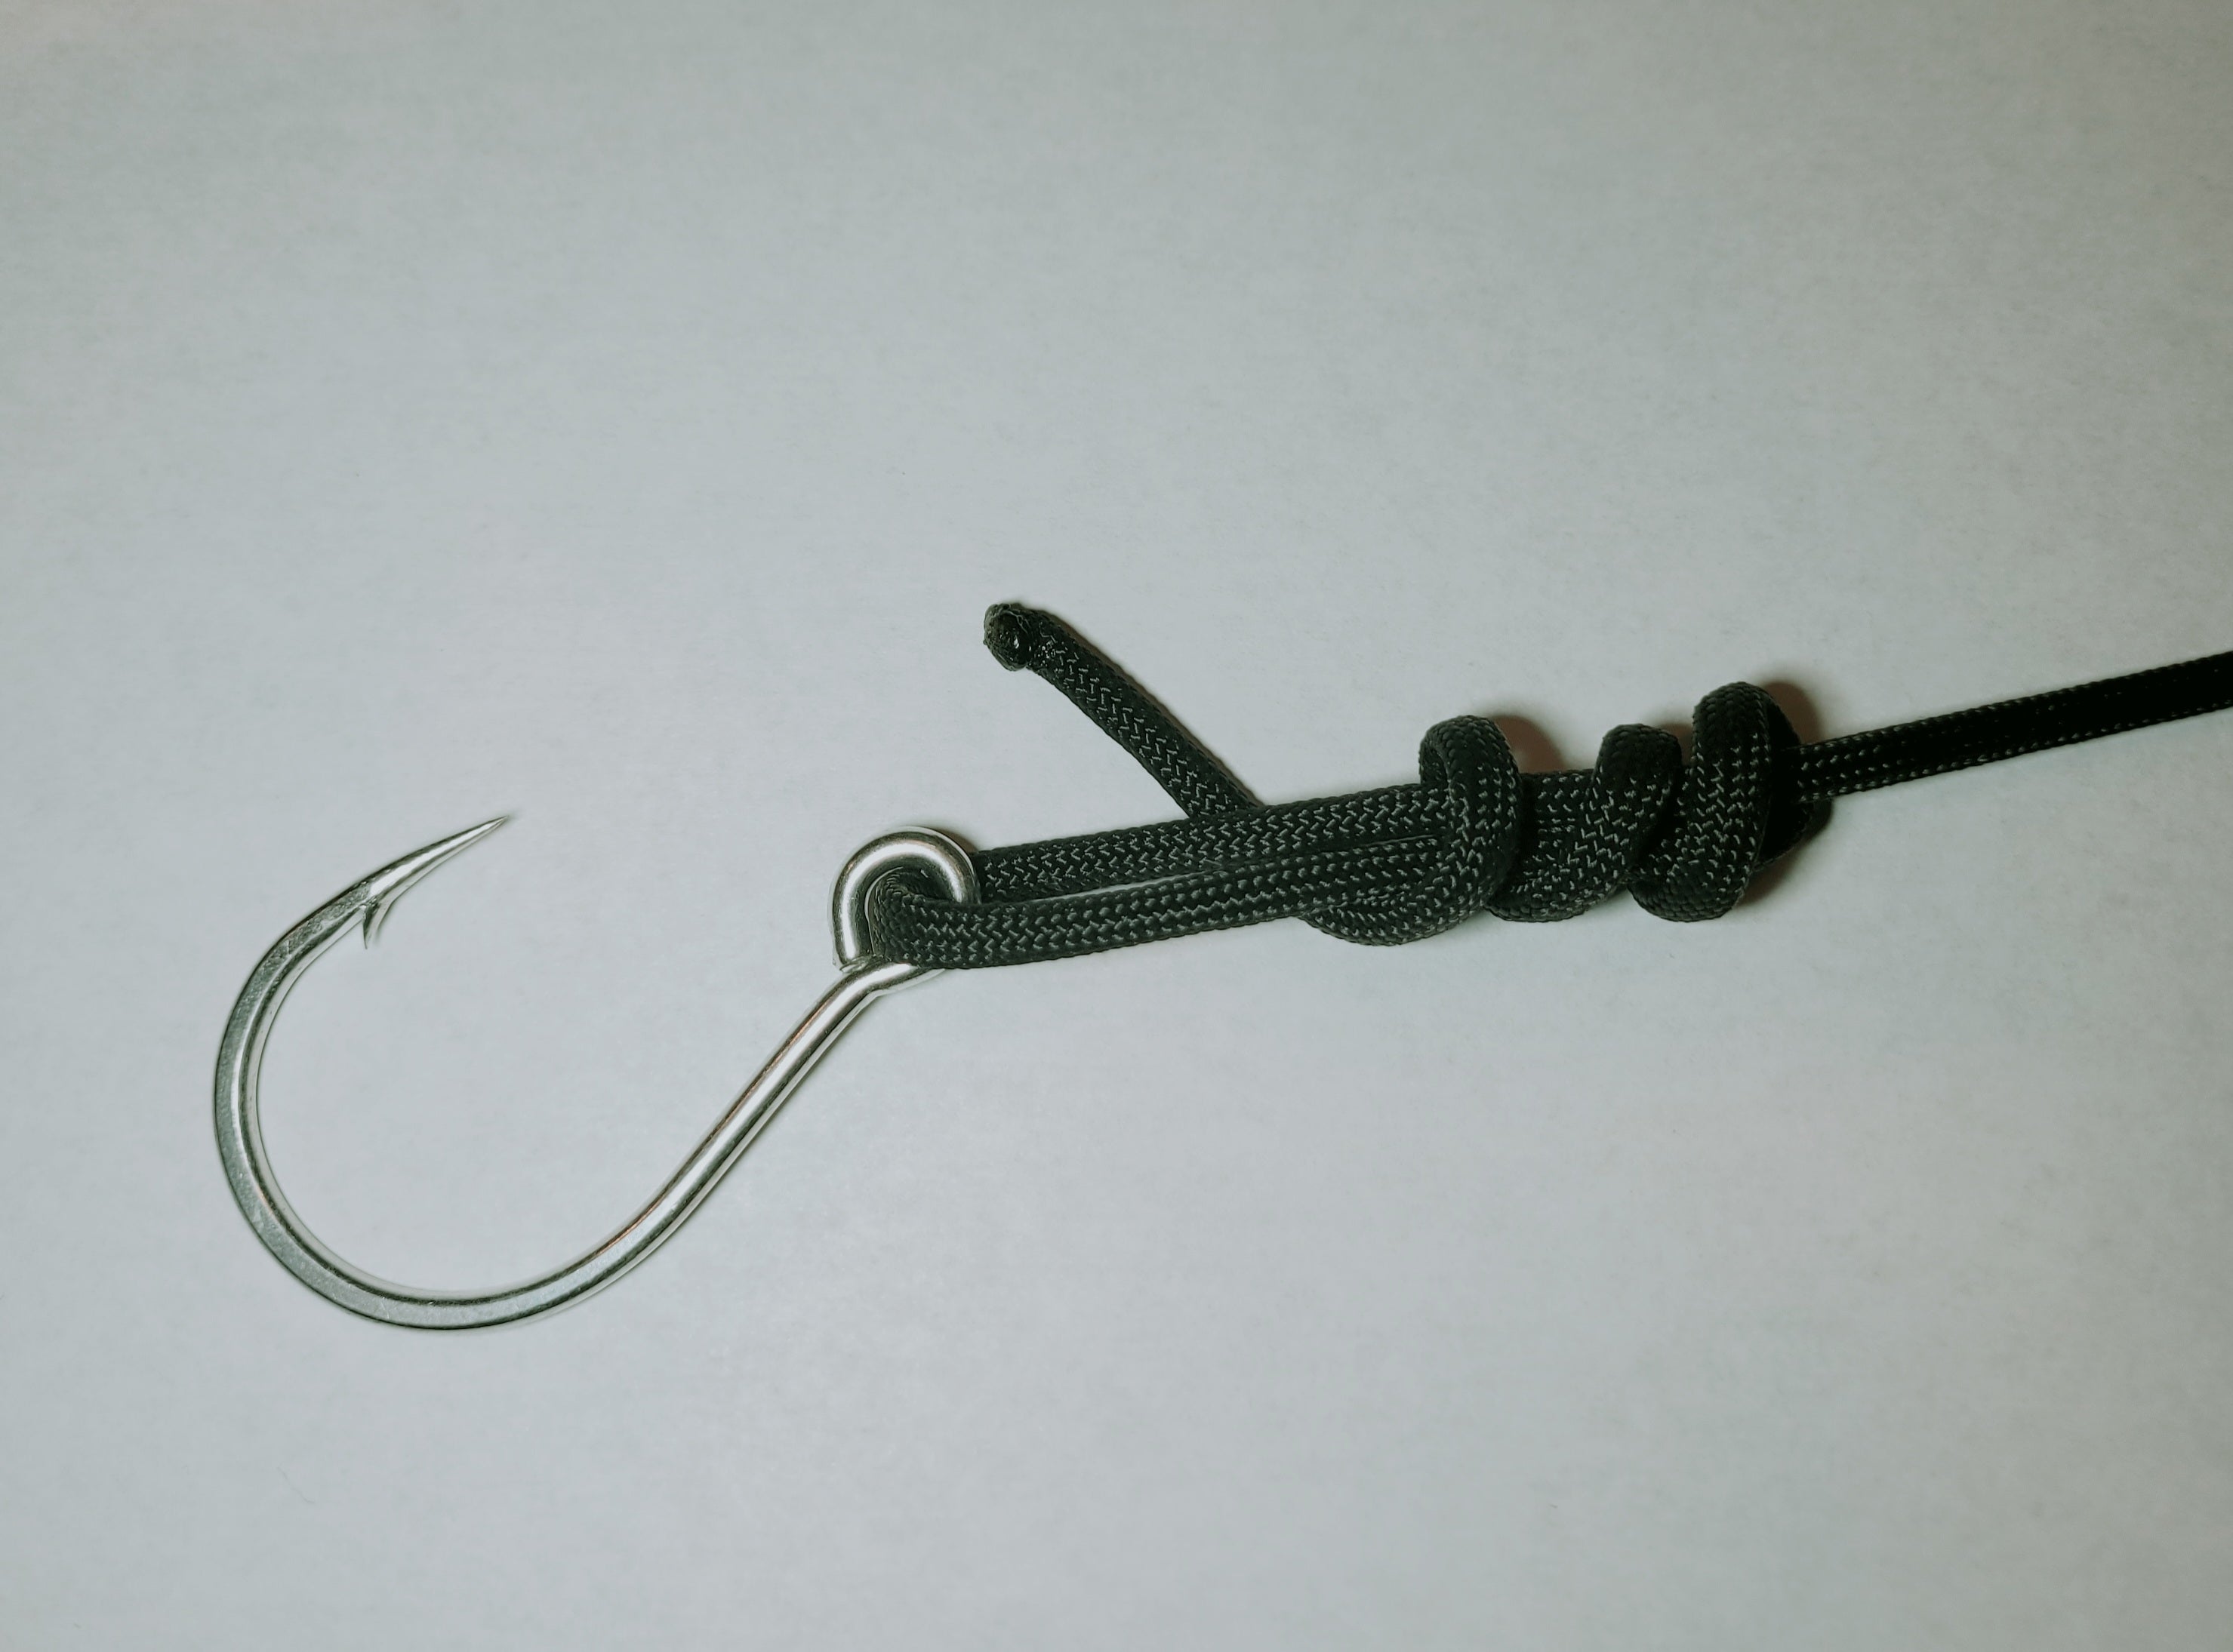 Are You Nuts? Know your Fishing Knots! – The San Diego Jam Knot